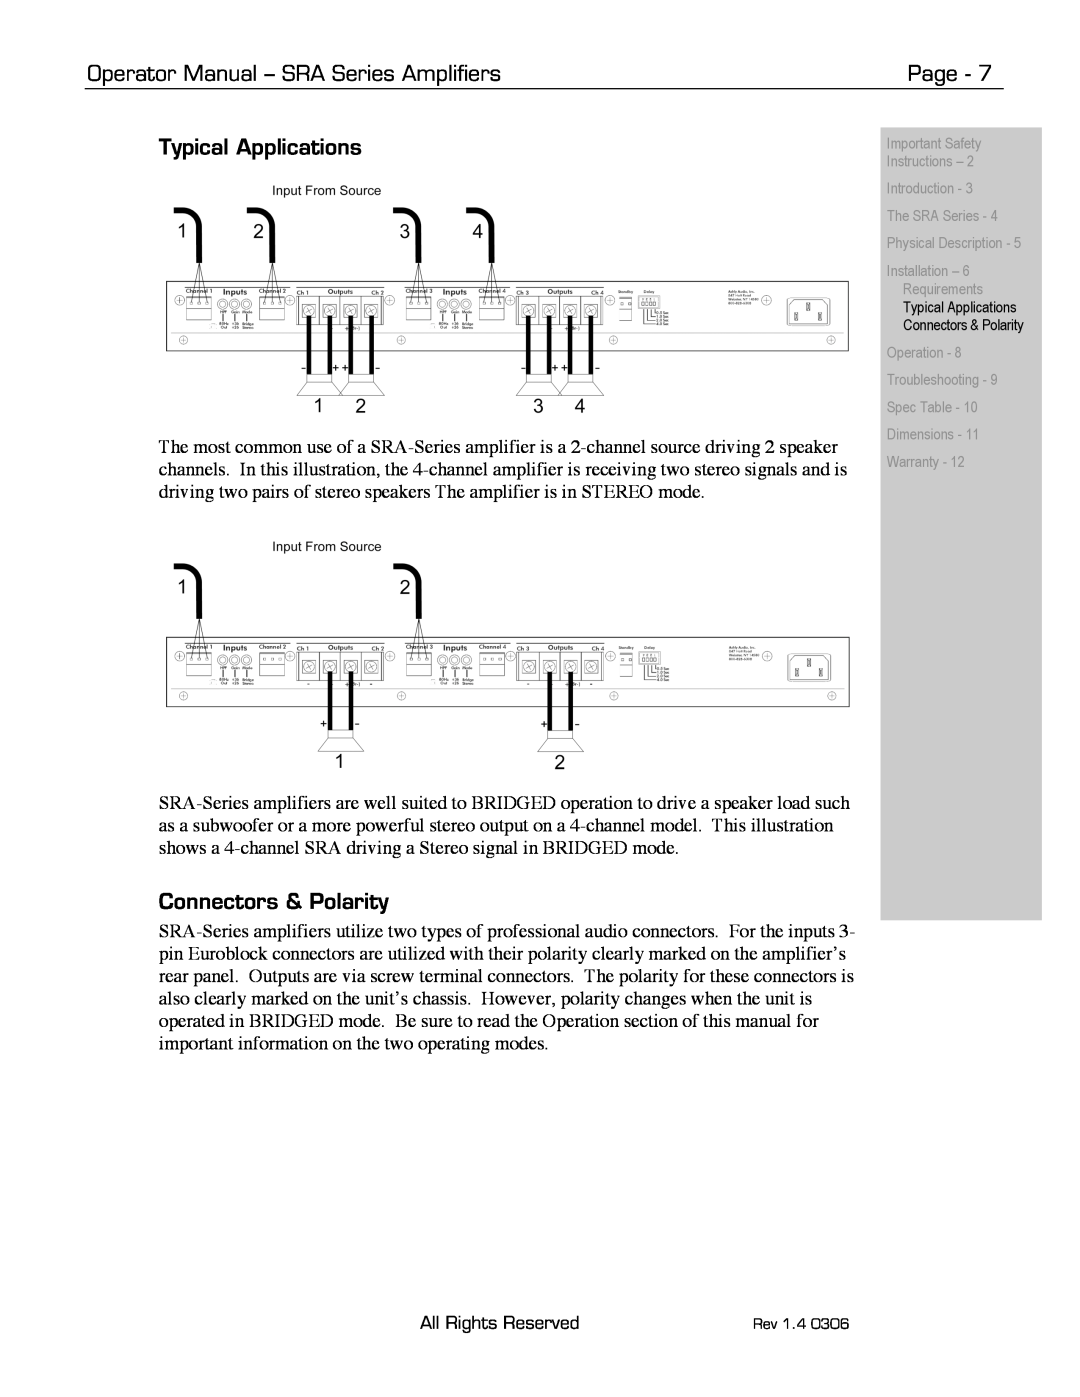 Ashly SRA-Series manual Typical Applications, Connectors & Polarity, Operator Manual - SRA Series Amplifiers, Page 